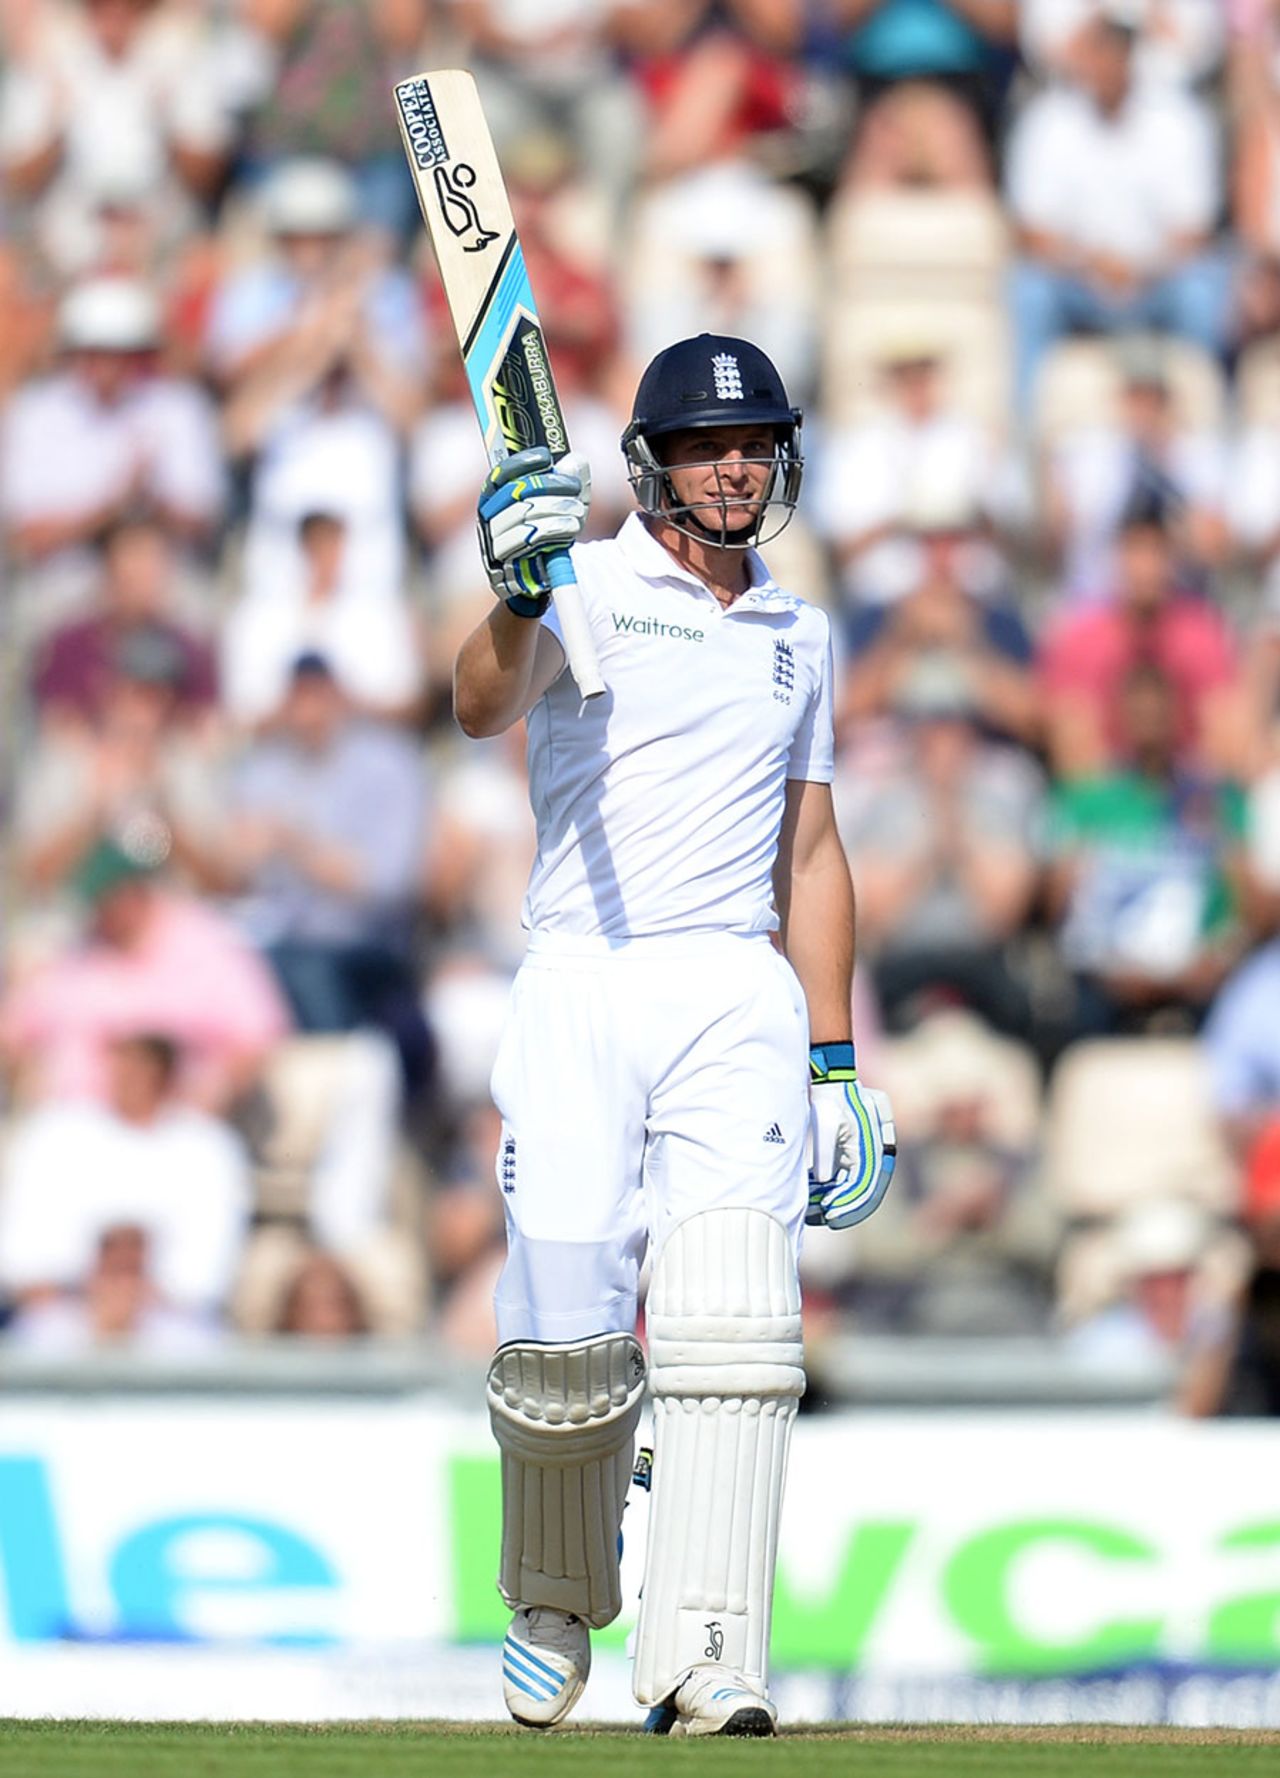 Jos Buttler went to fifty in 64 balls, England v India, 3rd Investec Test, Ageas Bowl, 2nd day, July 28, 2014